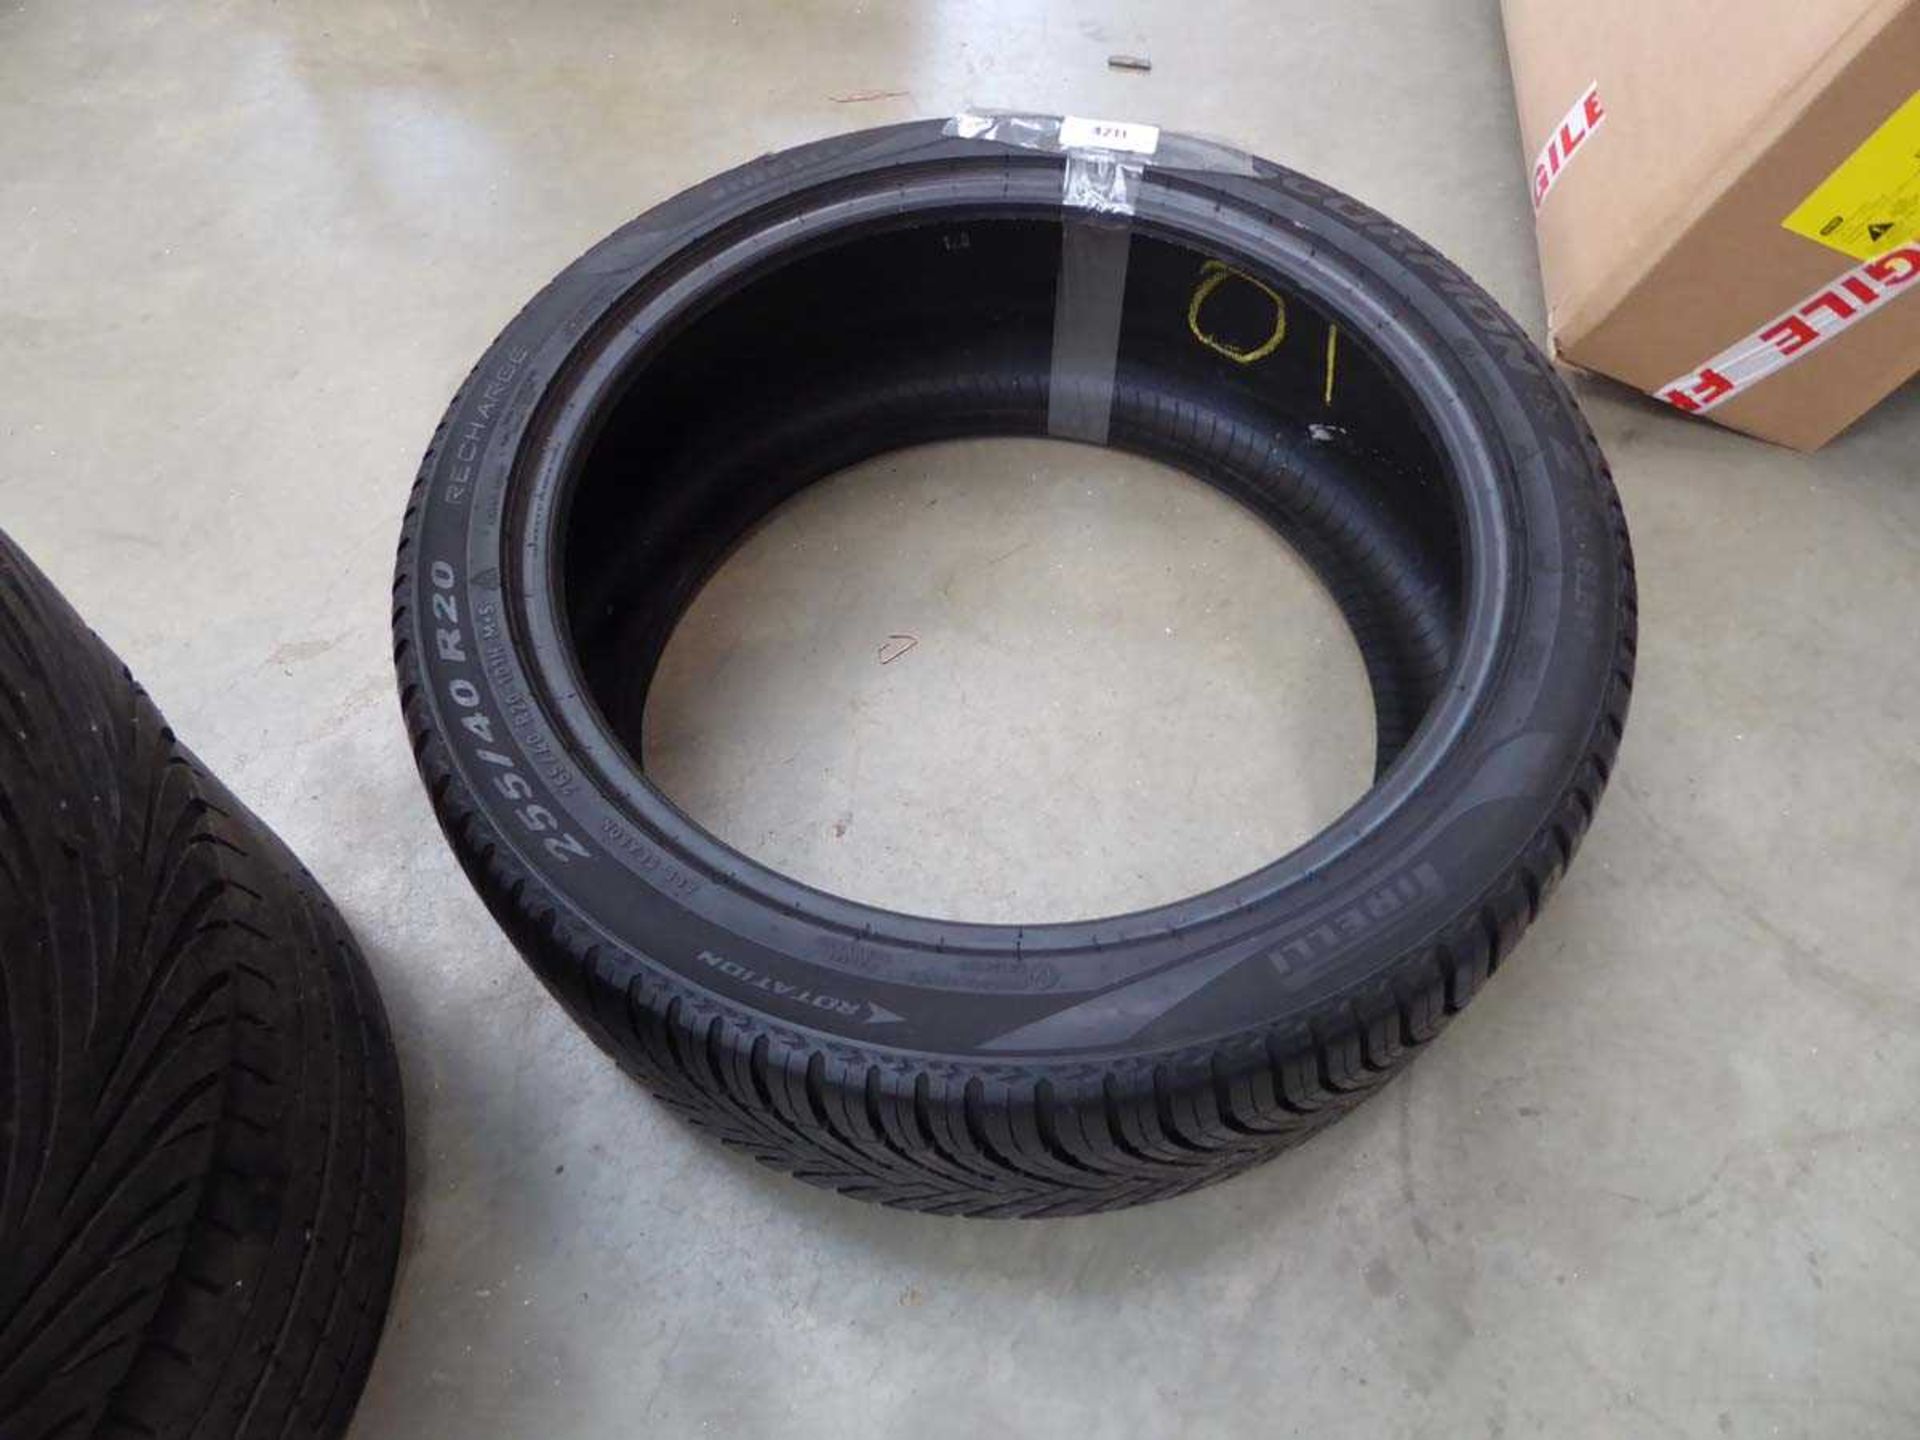 +VAT Pirelli tyre size 2554020 and 2 Maxxis tyres size 1858014